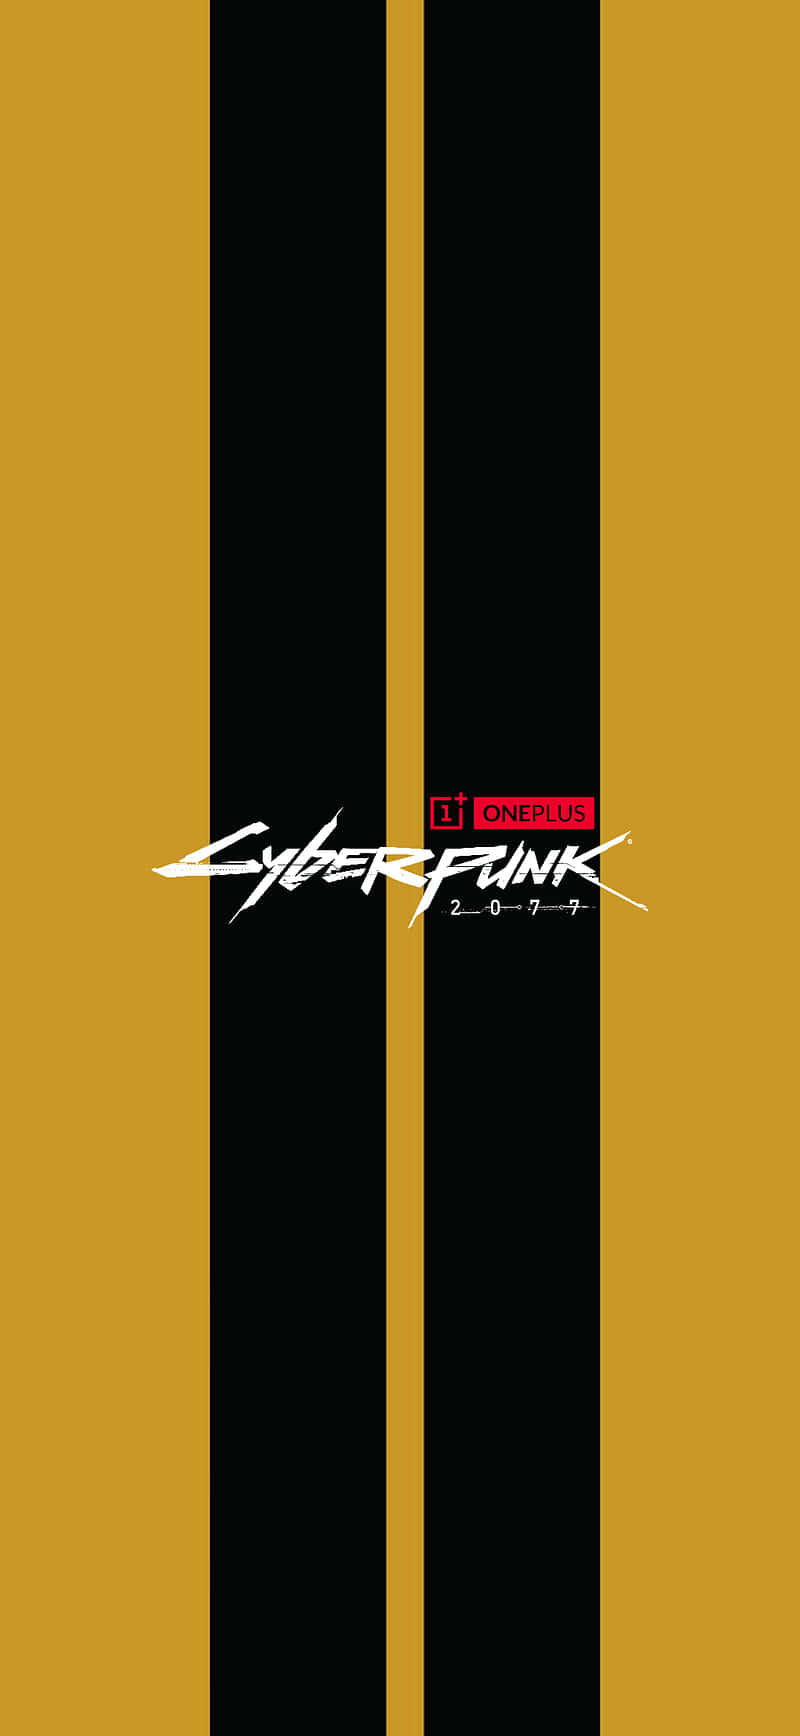 Iphone X Cyberpunk 2077 Background Yellow With Black Stripes